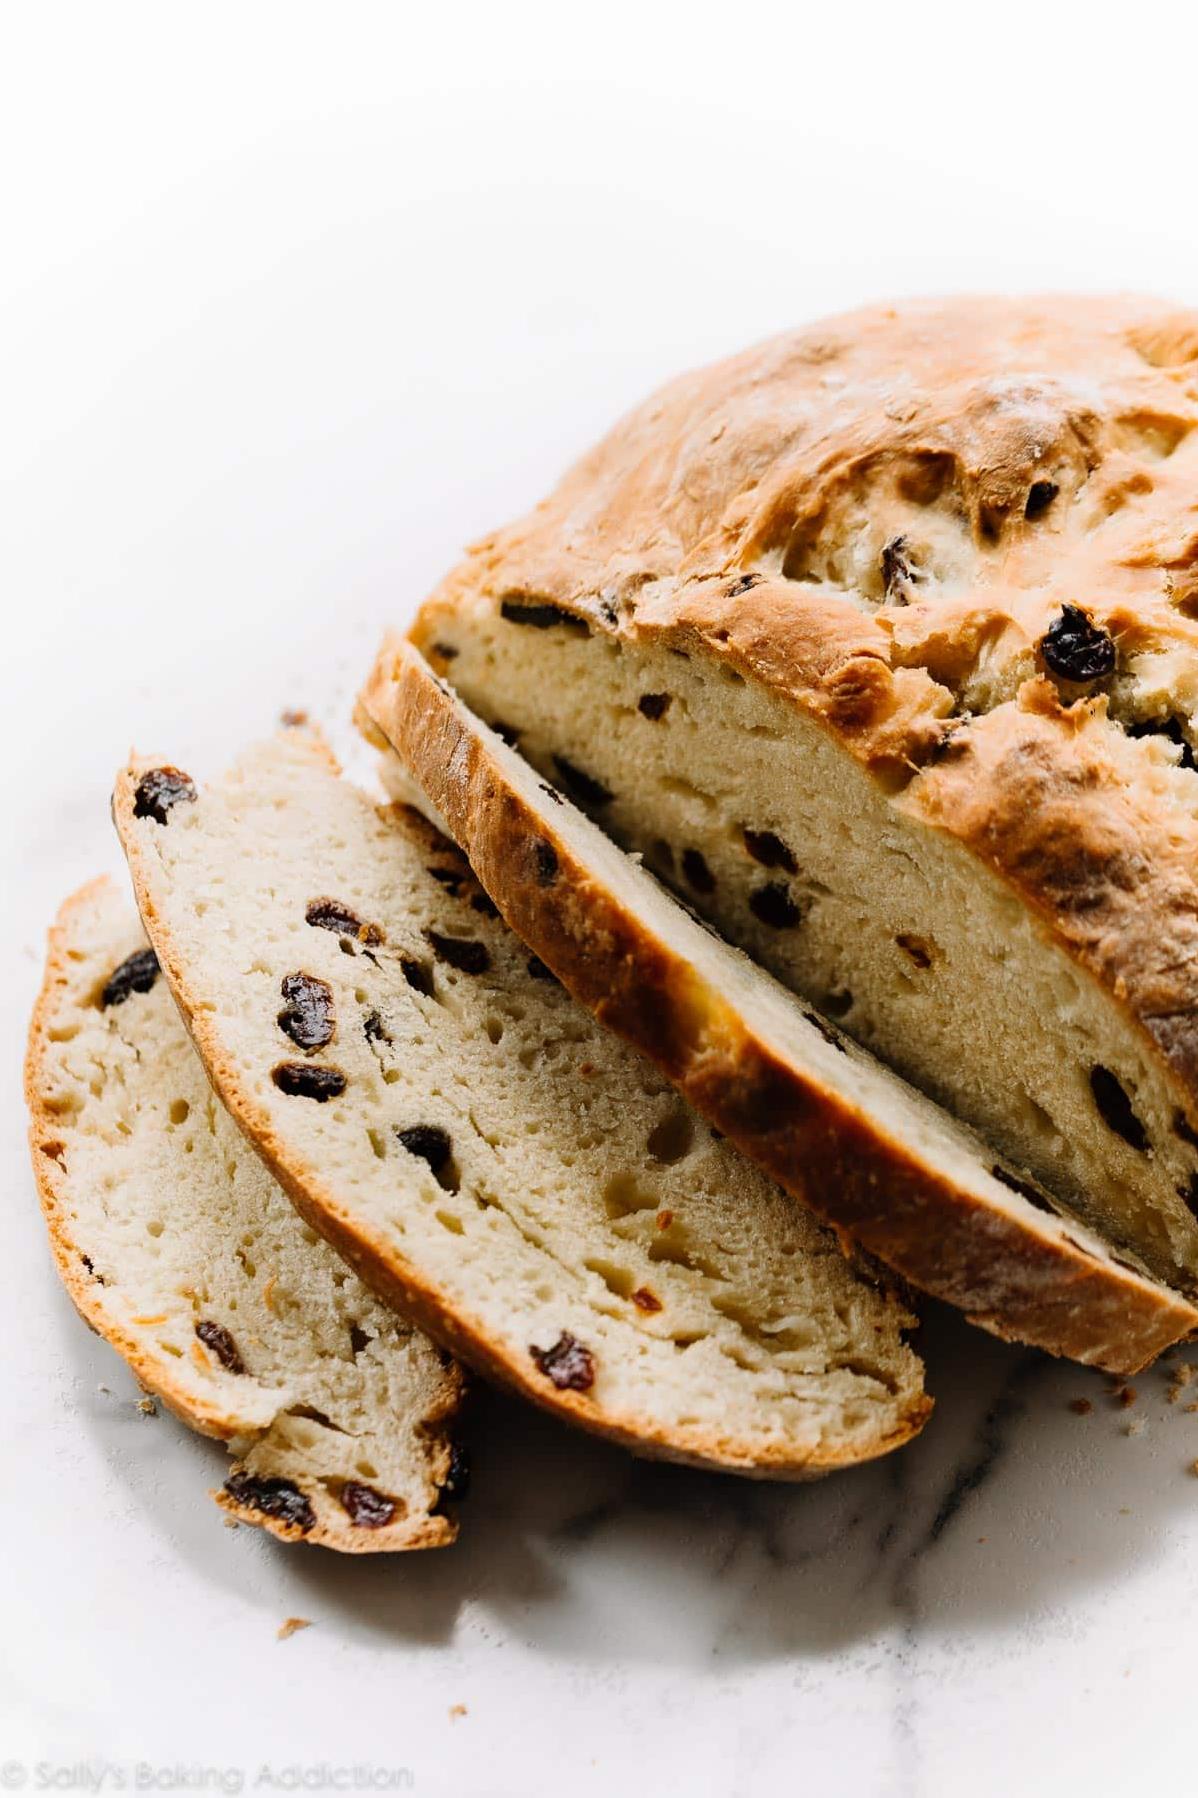 Warm Up Your Home with This Irish Bread Recipe